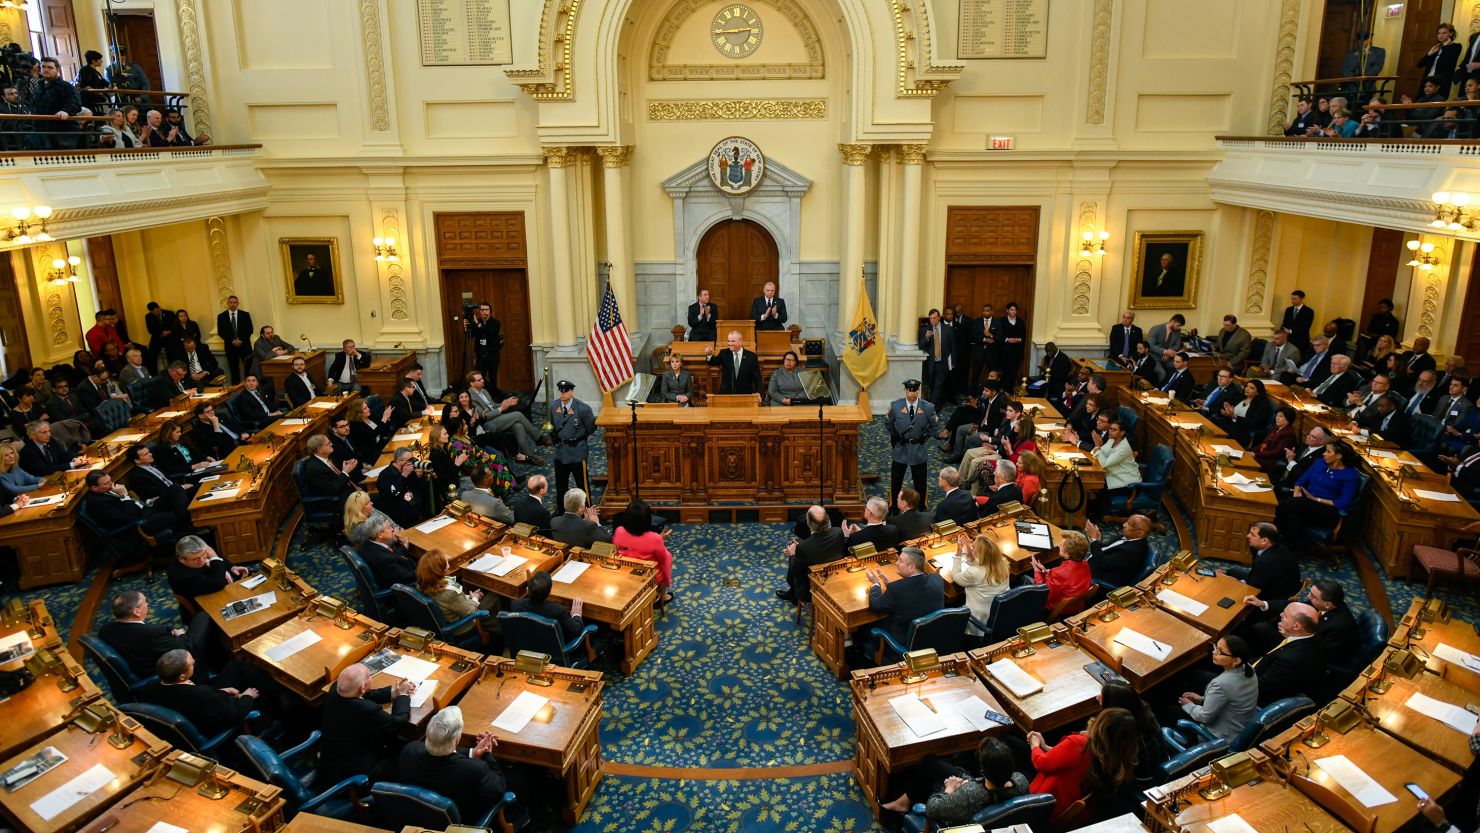 A bill legalizing assisted suicide narrowly passed the Senate before it was signed into law